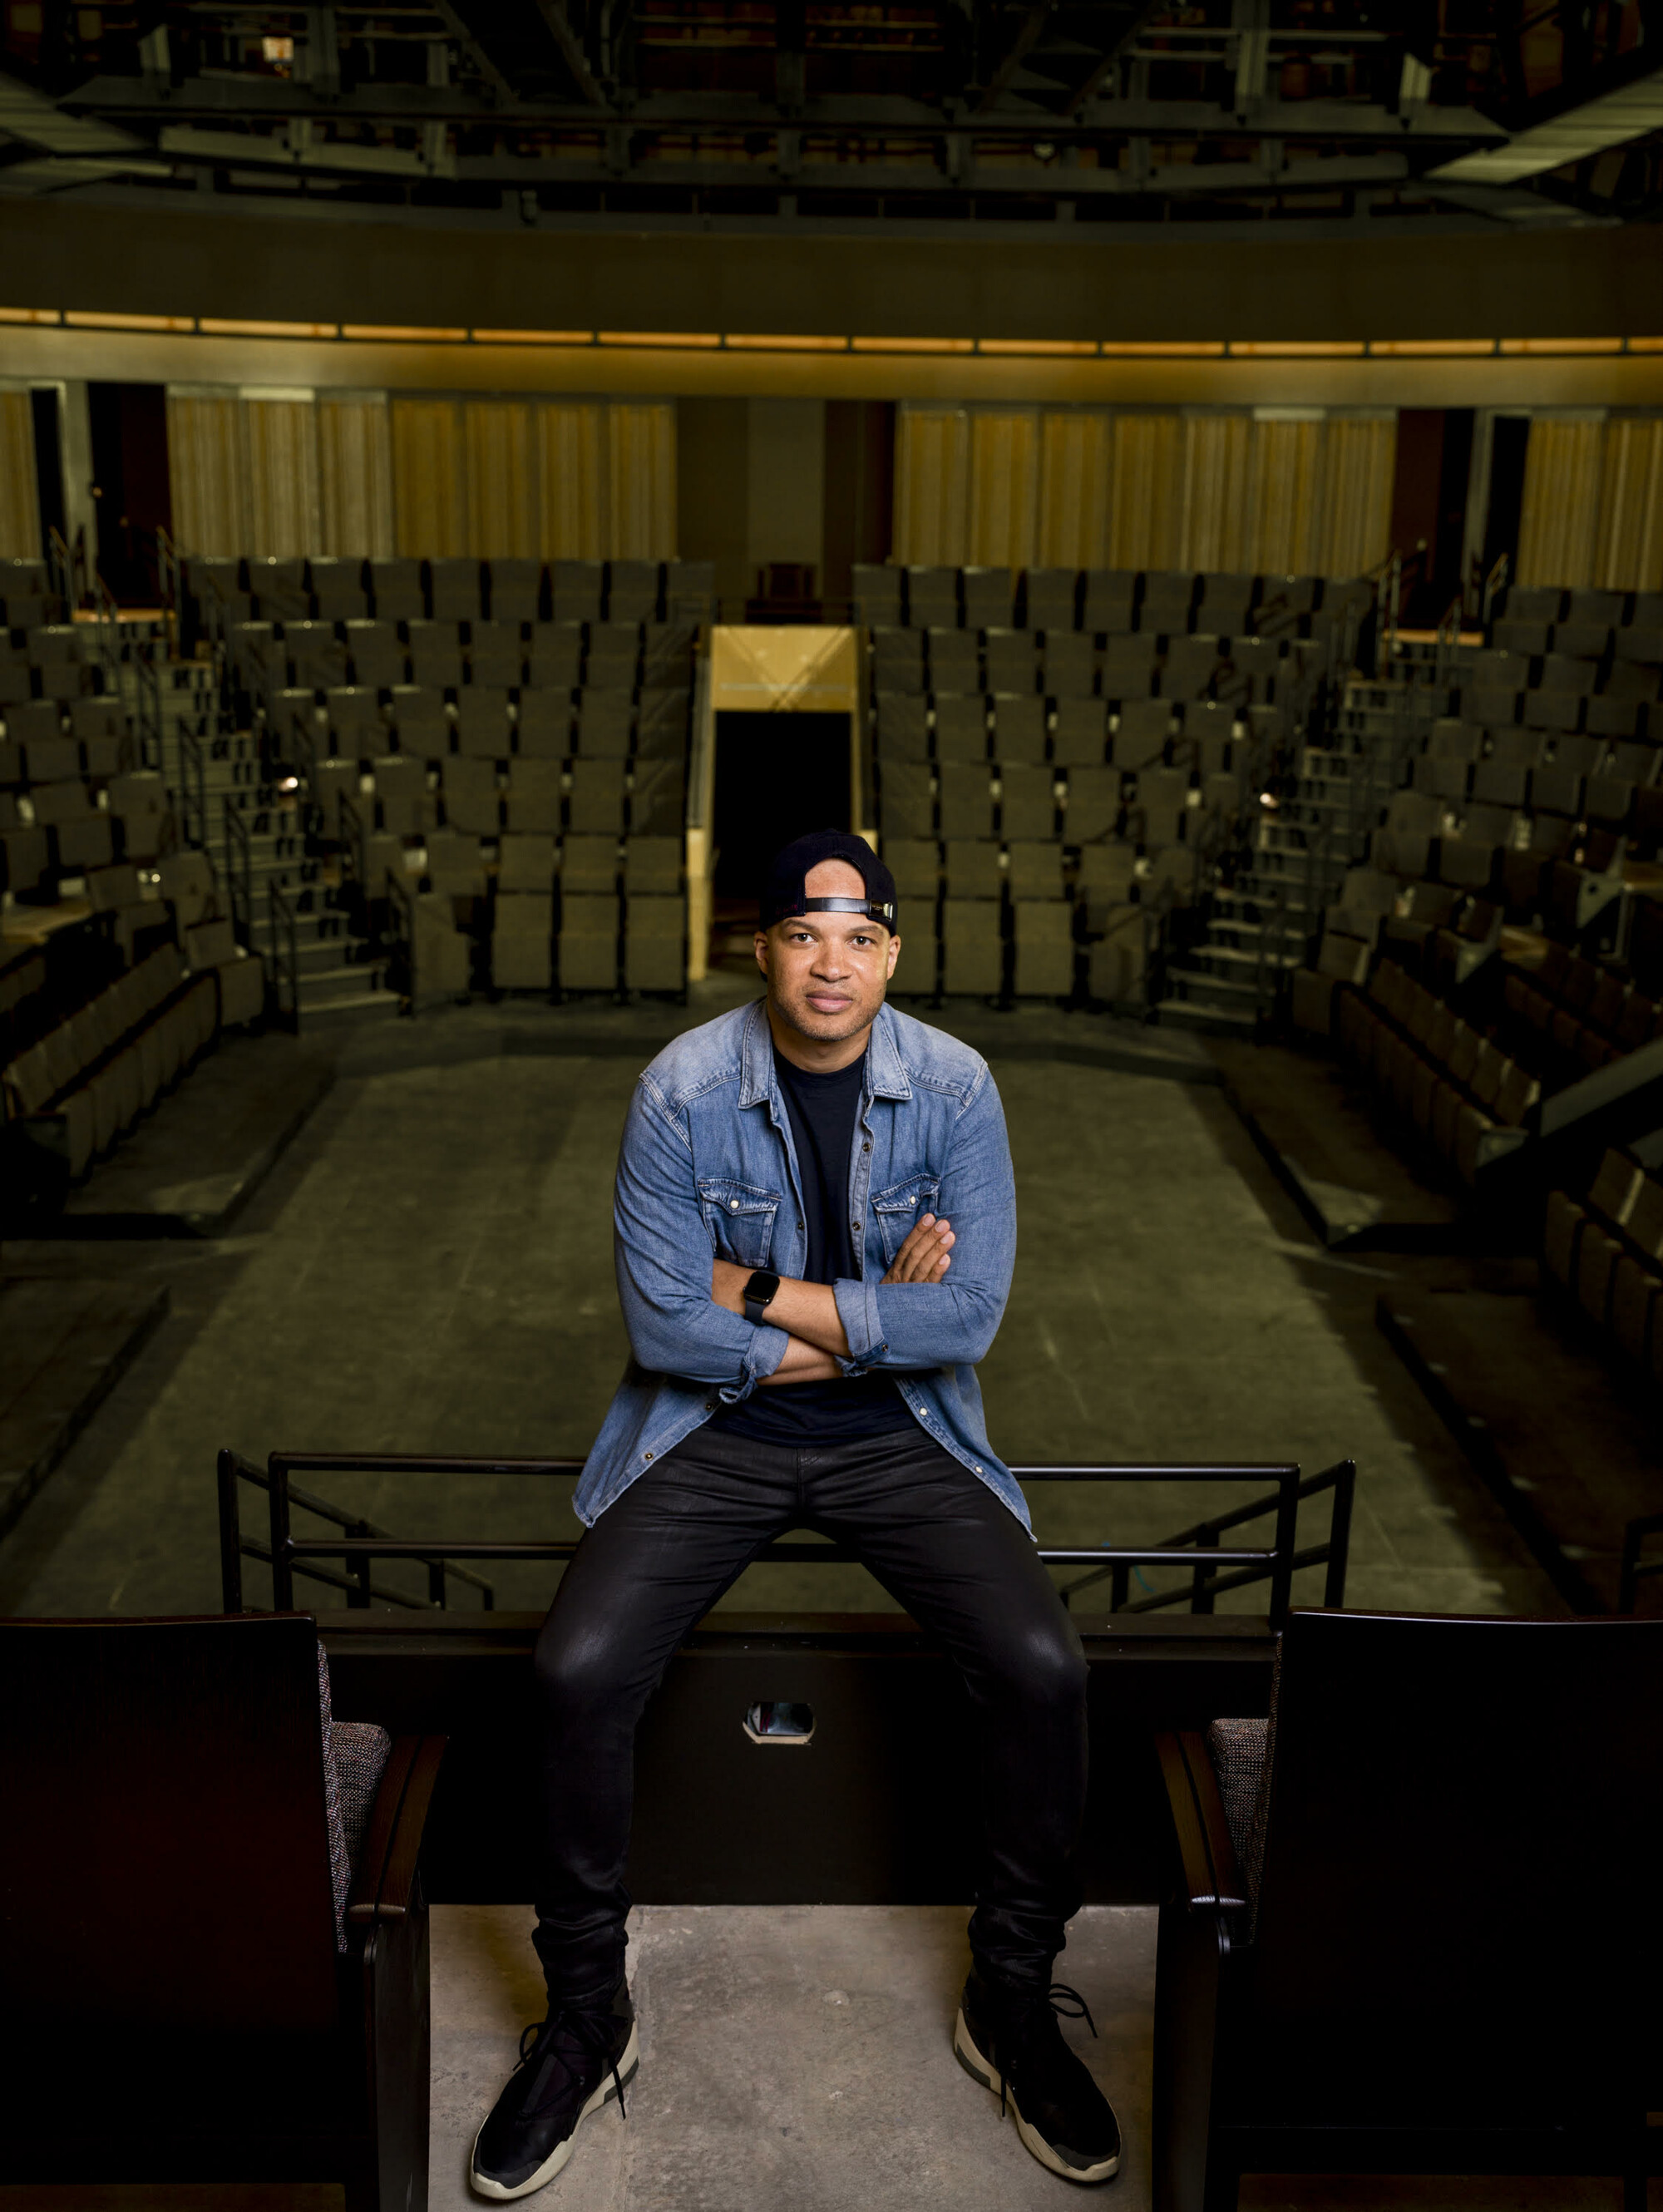 Individual wearing blue jean jacket, black baseball cap and, black shirt and pants sitting on railing in theatre.